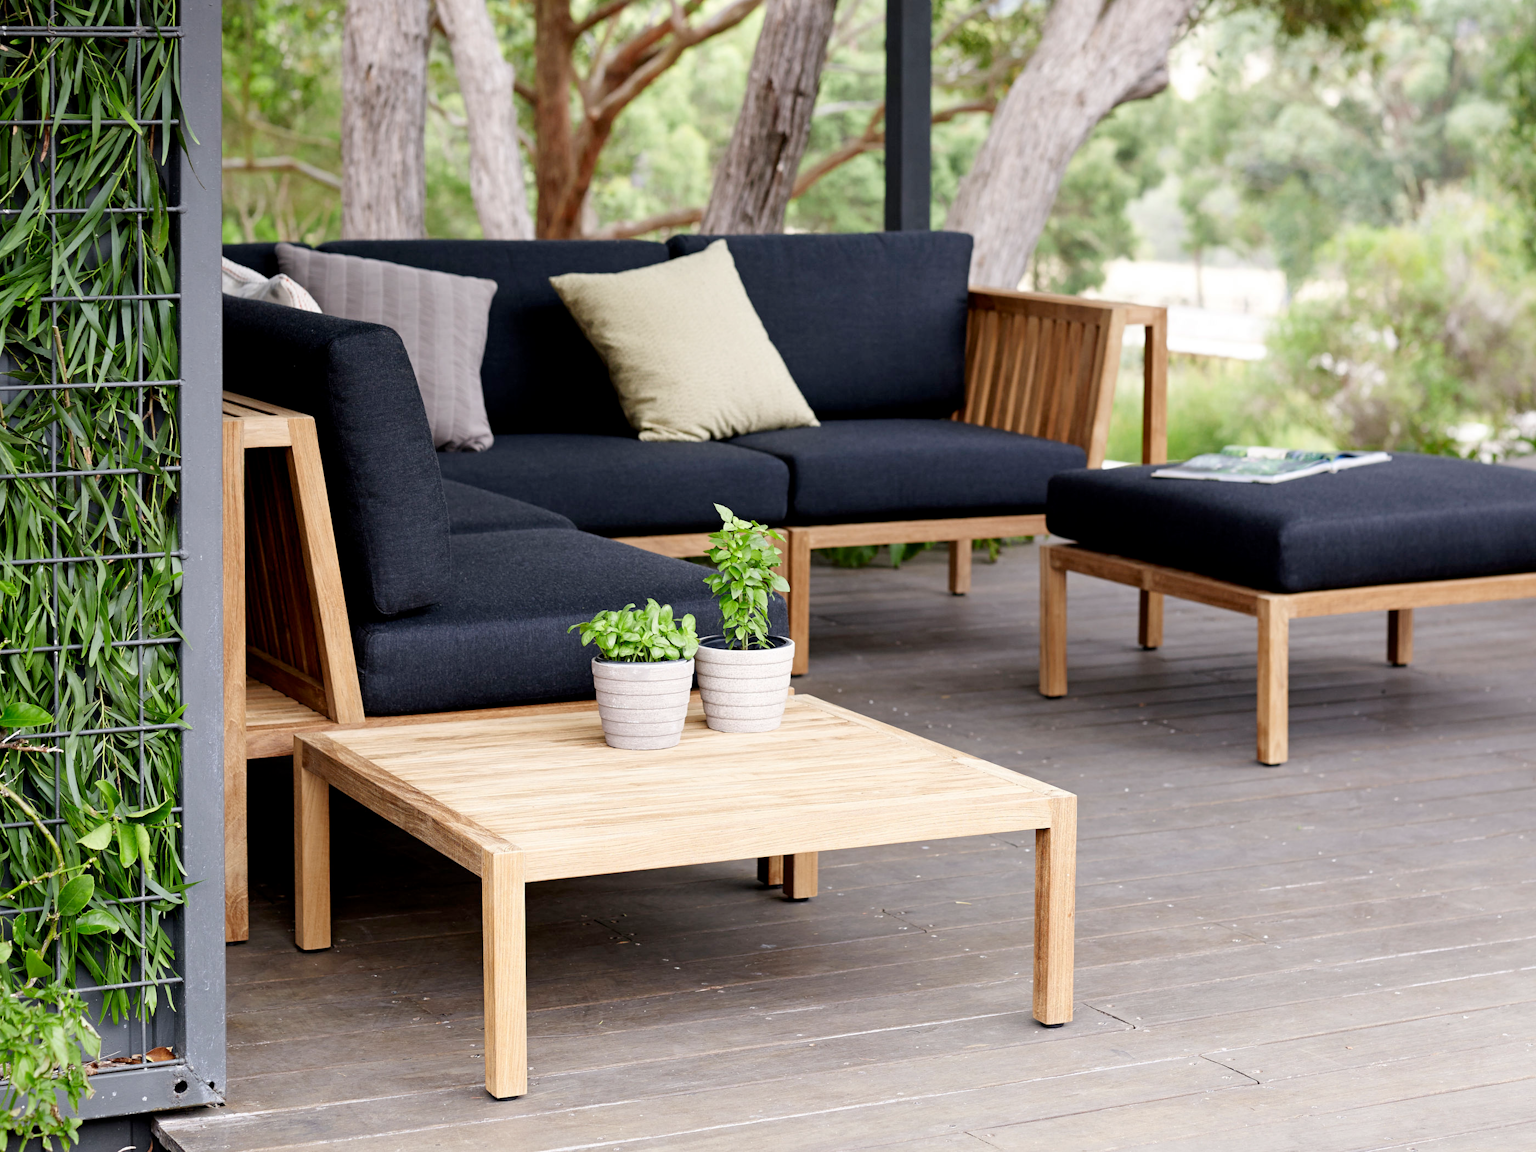 Watego modular in Basics outdoor fabric with Watego ottoman and low table in outdoor entertainment area